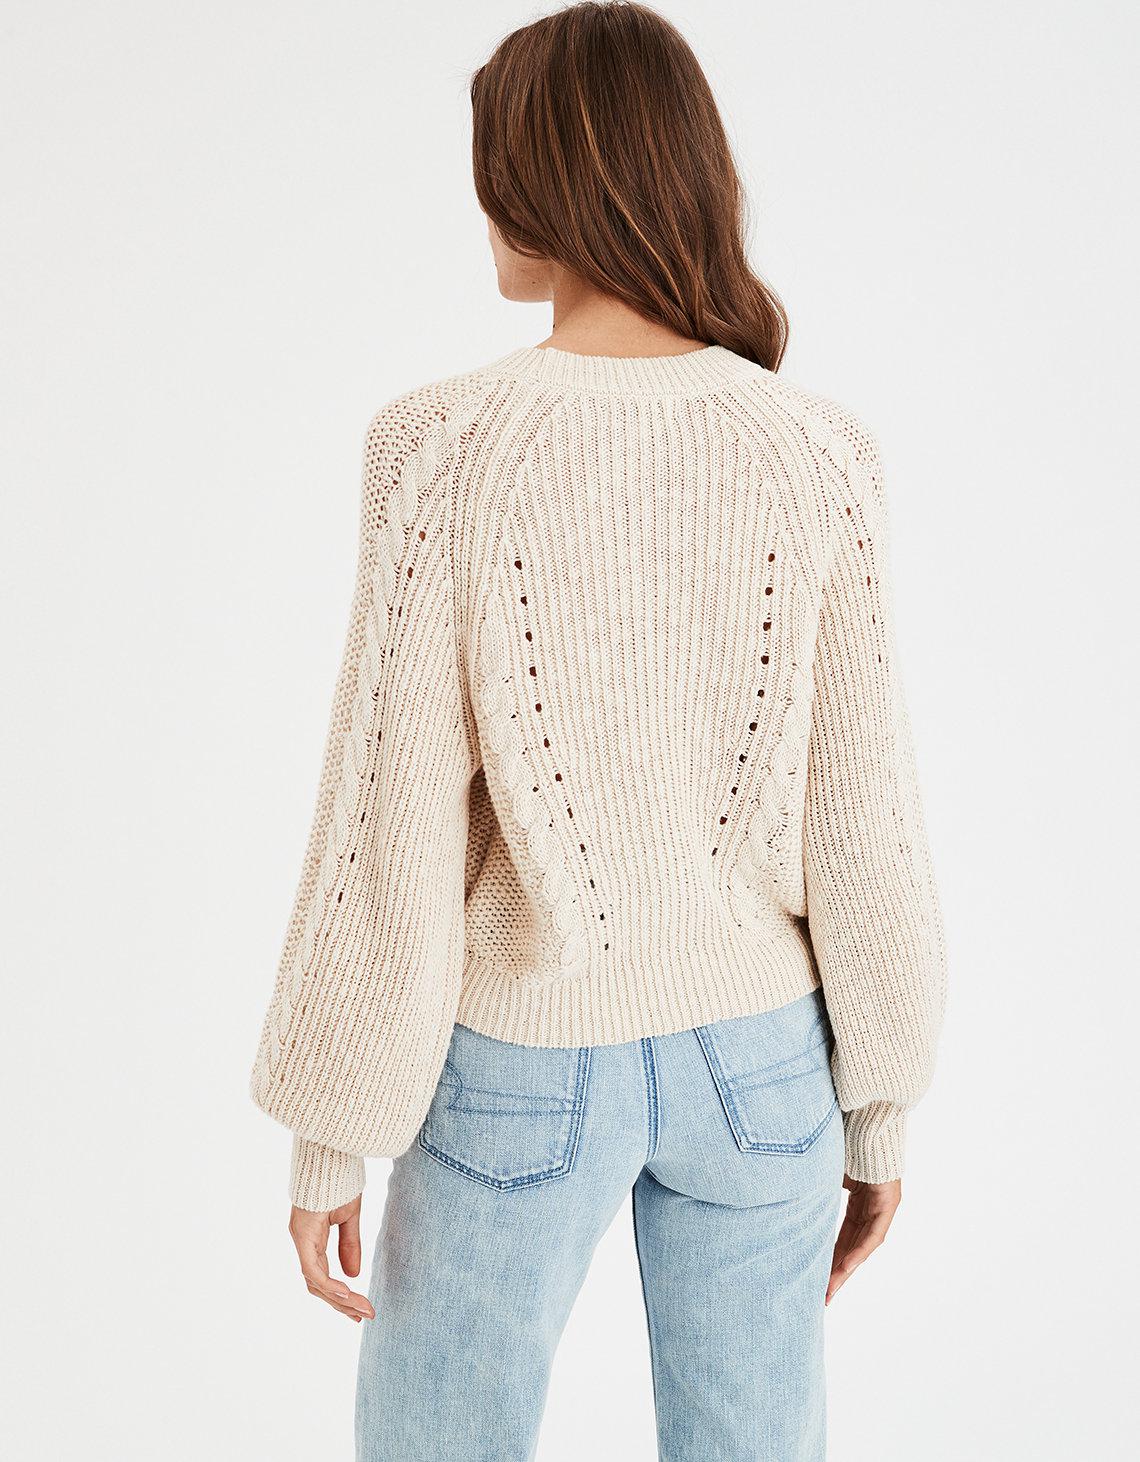 Lyst - American Eagle Ae Chunky Cable Knit Pullover Sweater in Natural